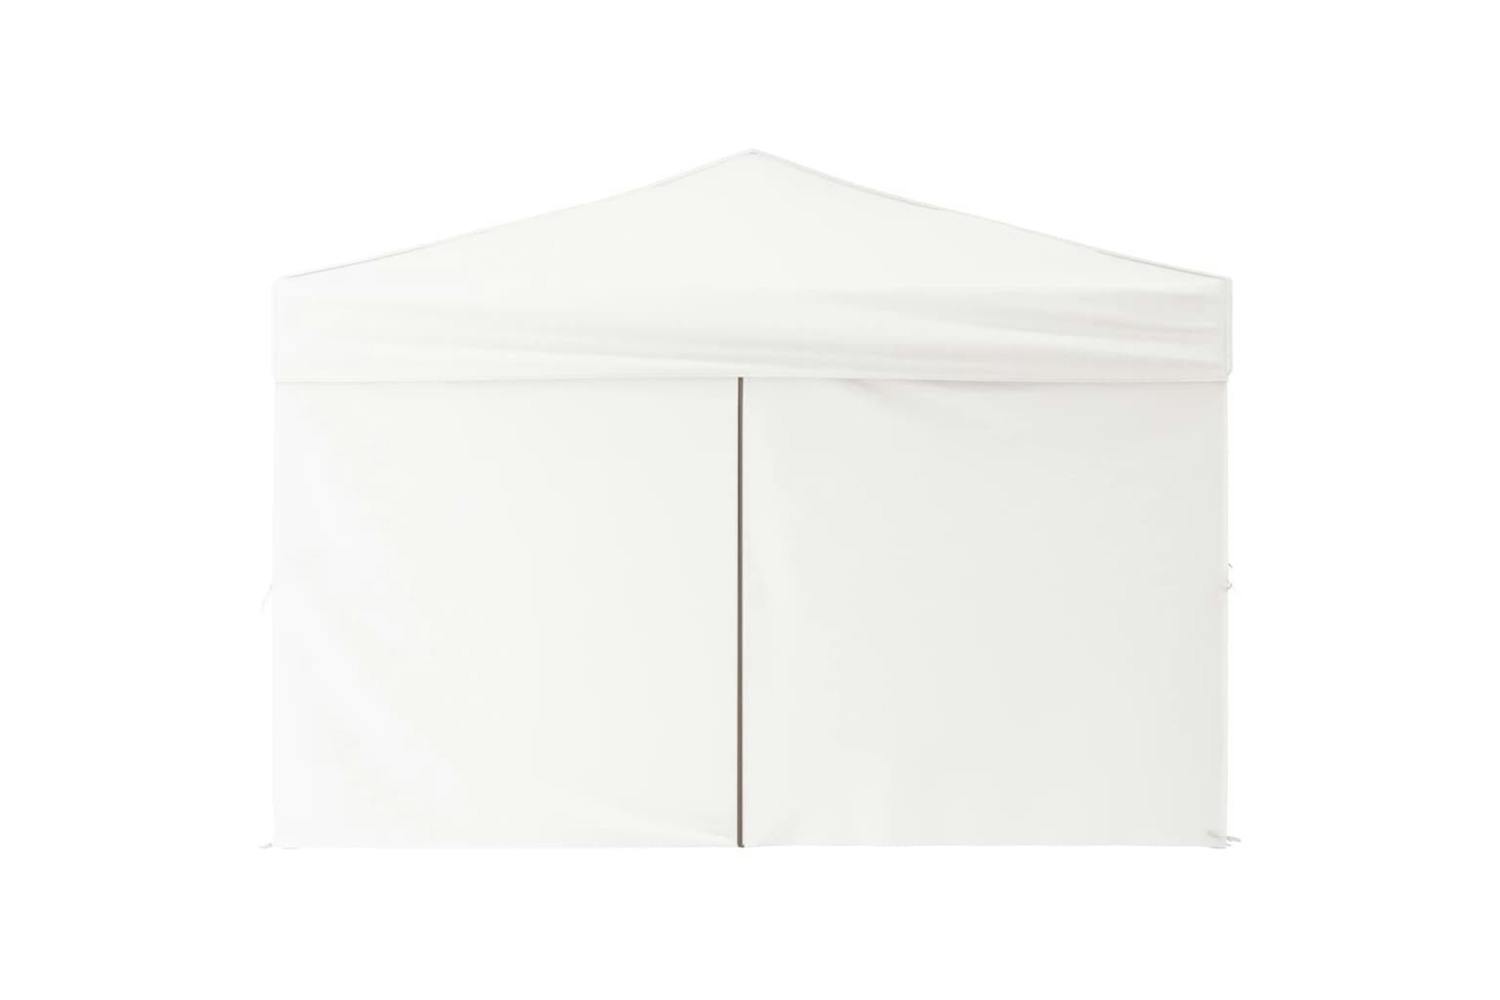 Vidaxl 93524 Folding Party Tent With Sidewalls White 3x3 M